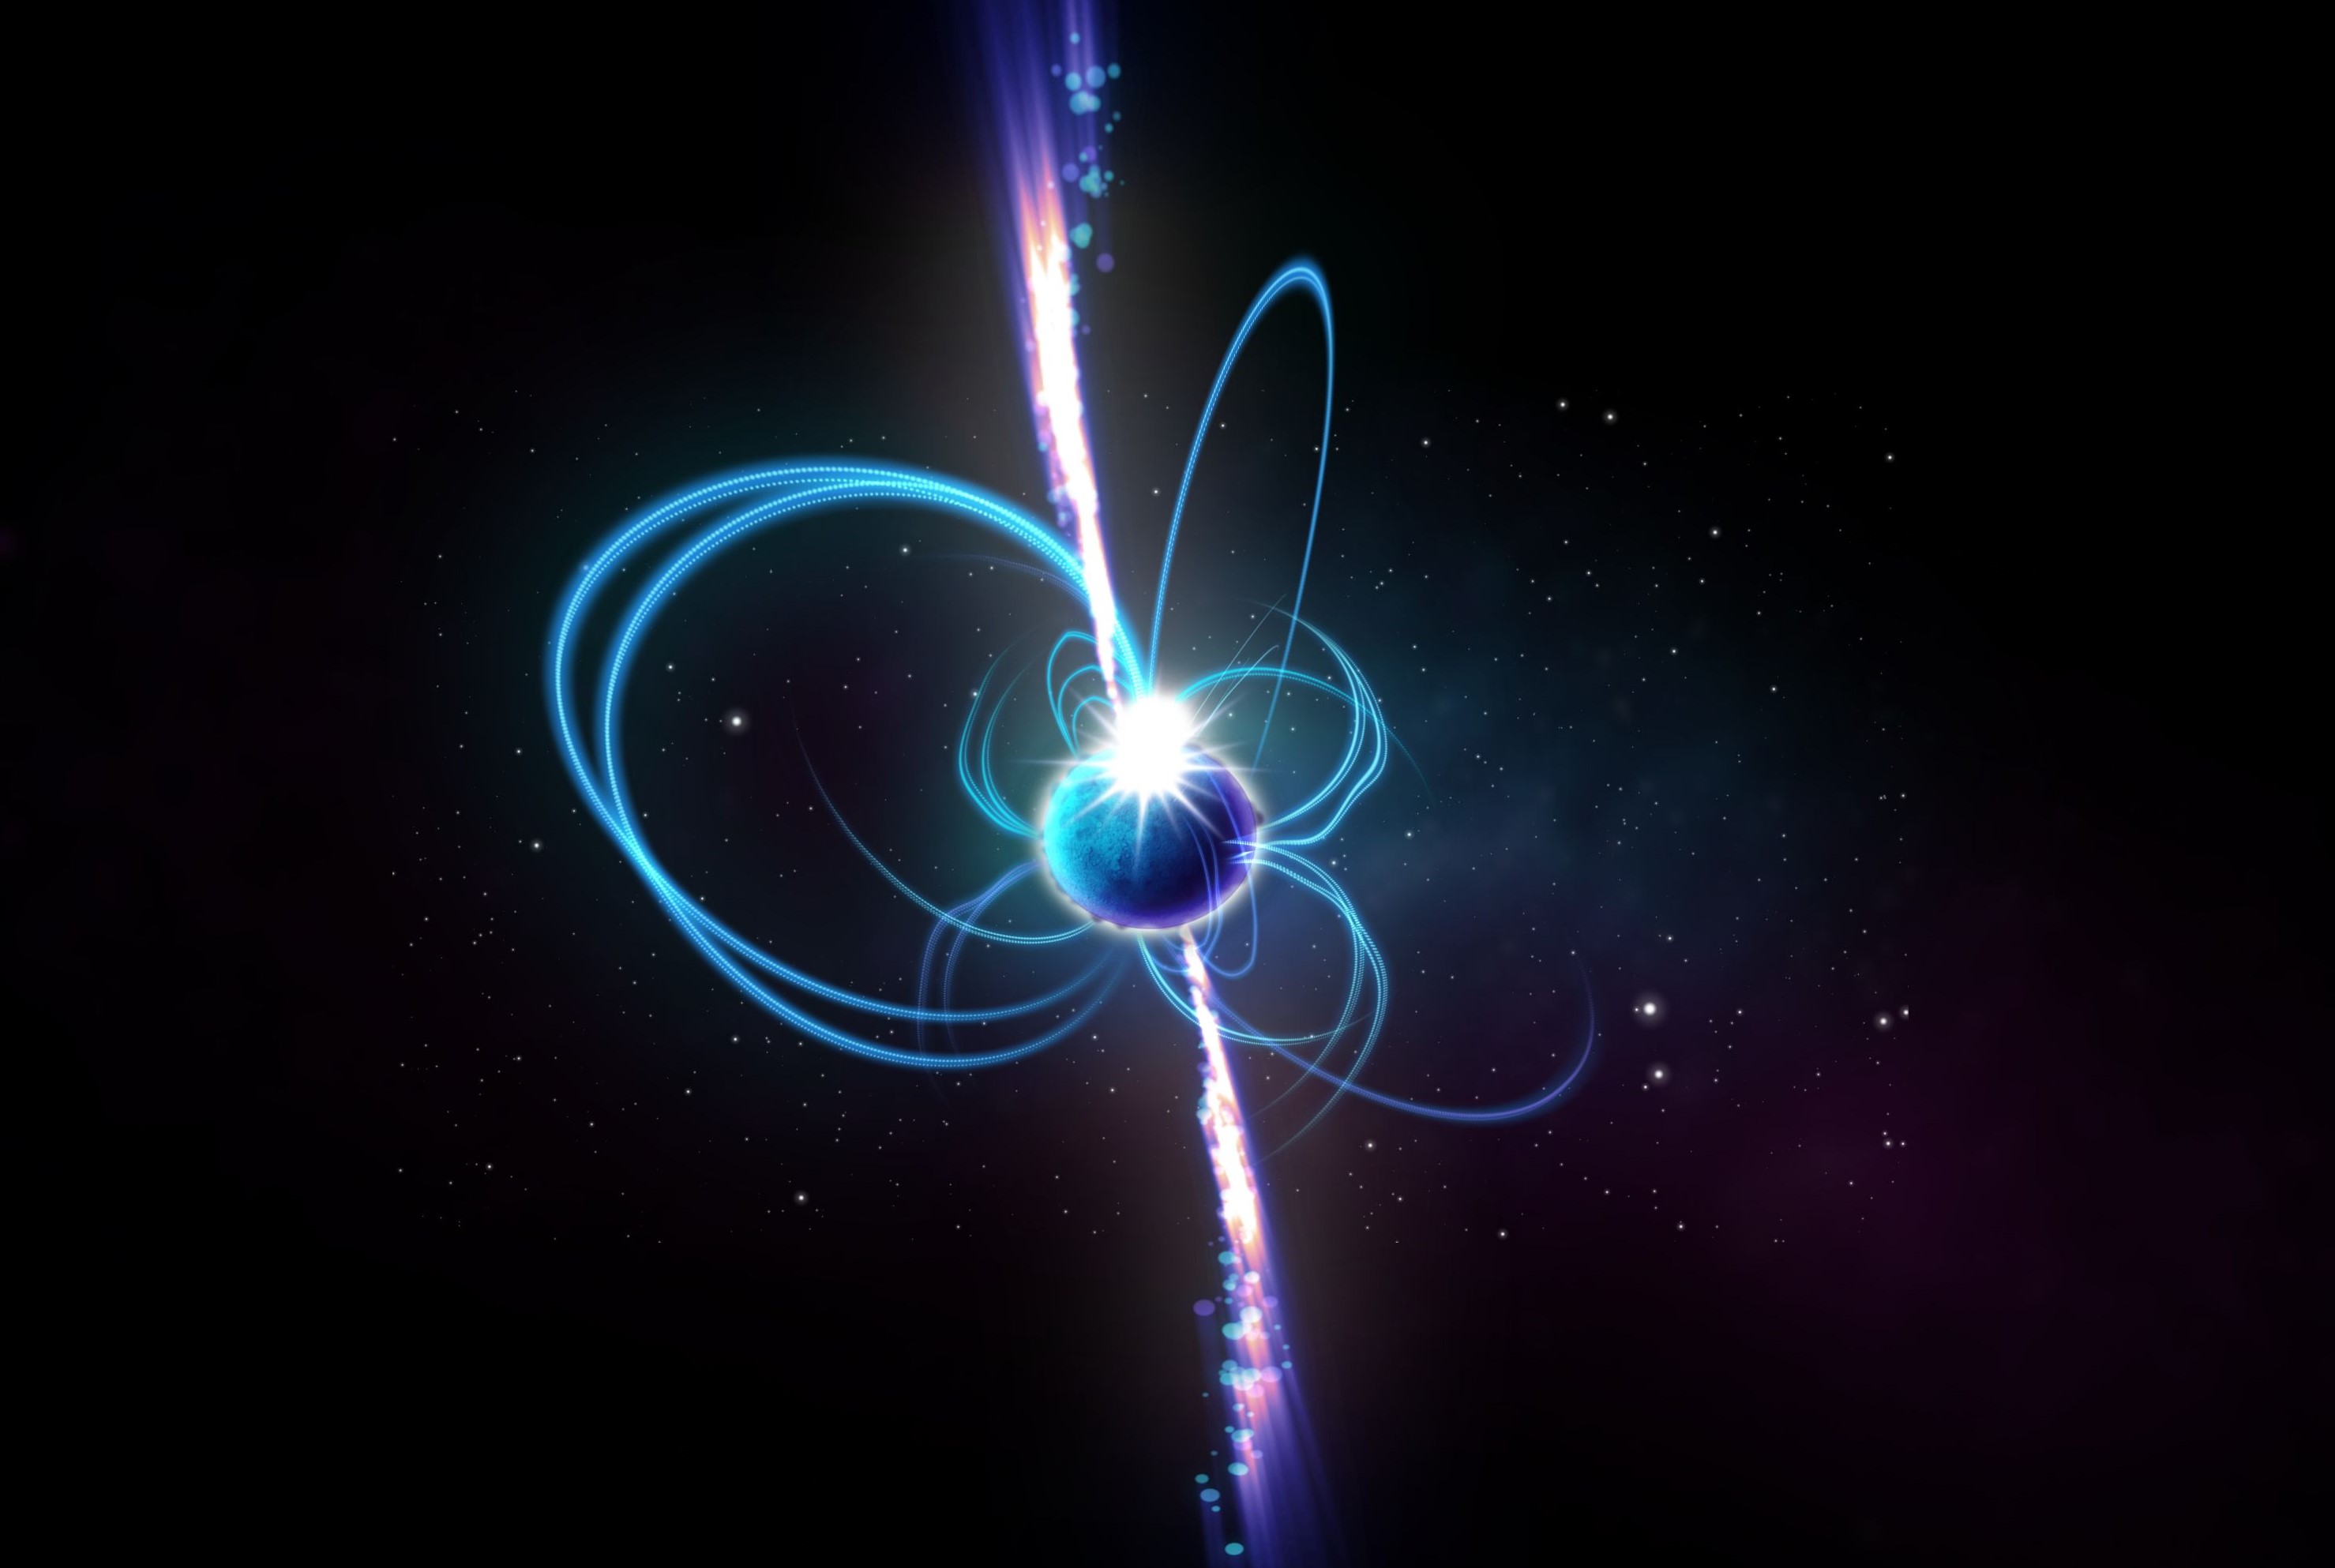 Artist’s impression of what the object might look like if it’s a magnetar.